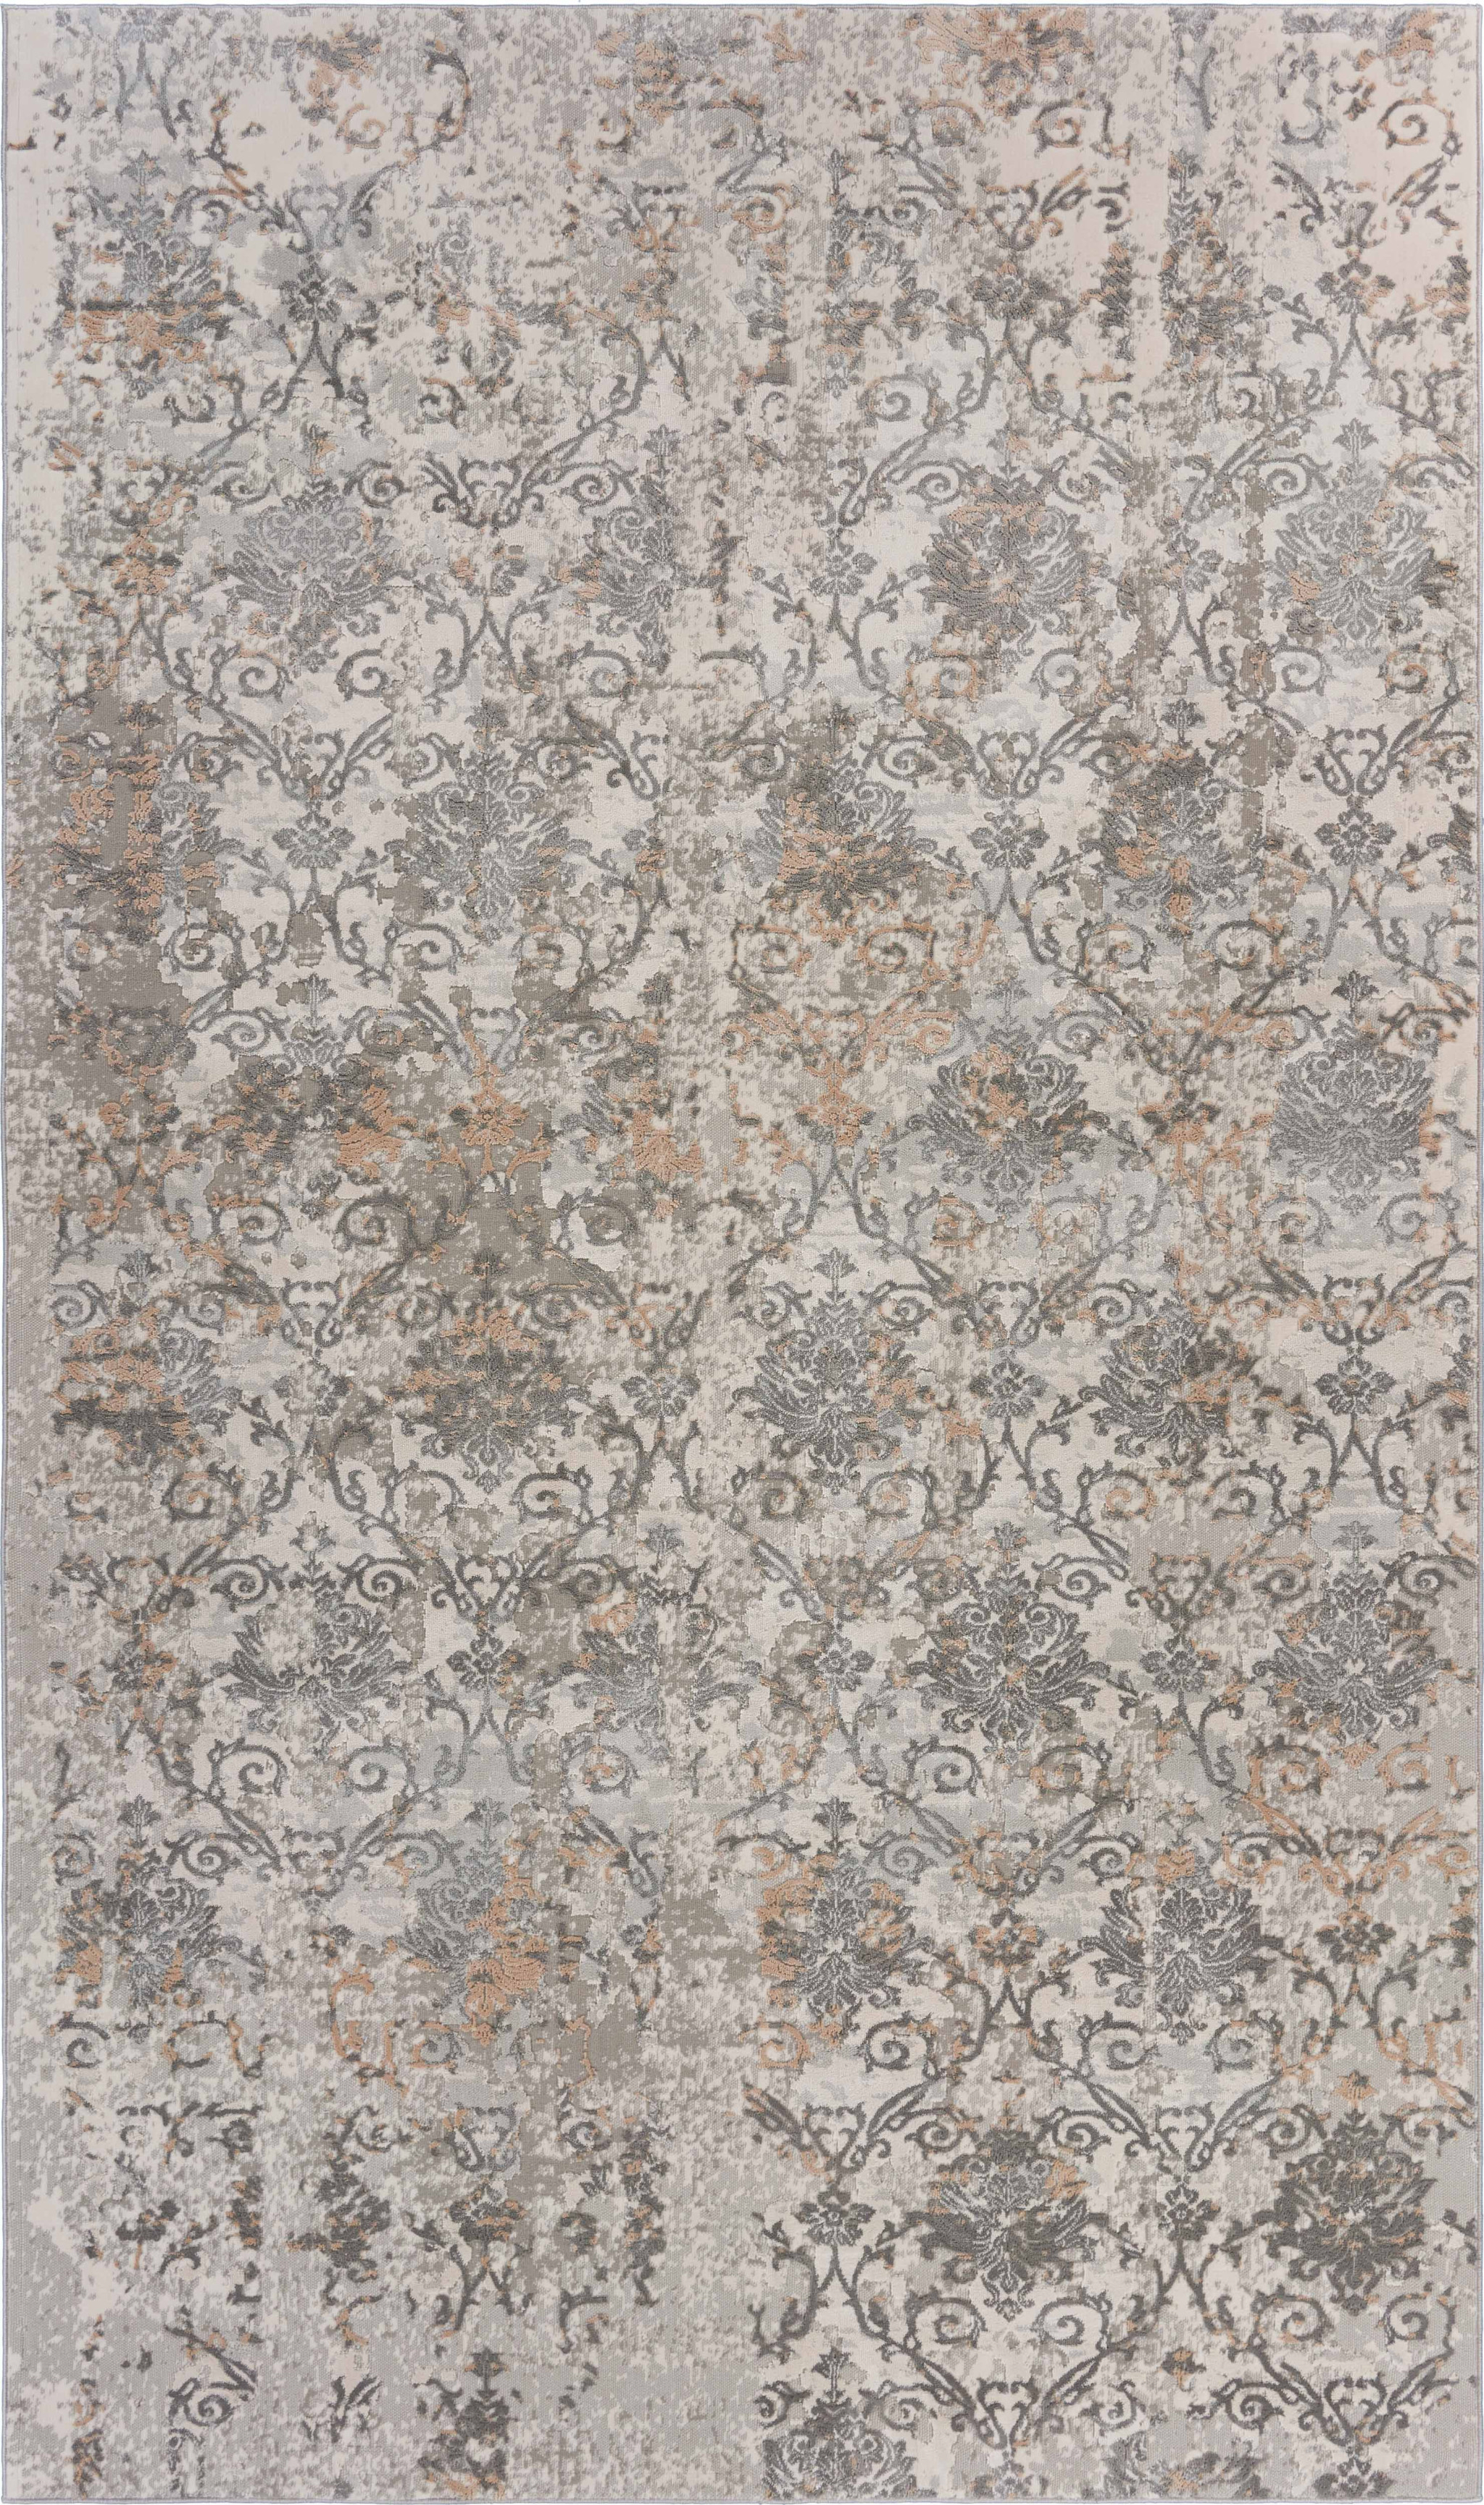 8' X 11' Cream Abstract Distressed Area Rug-515987-1